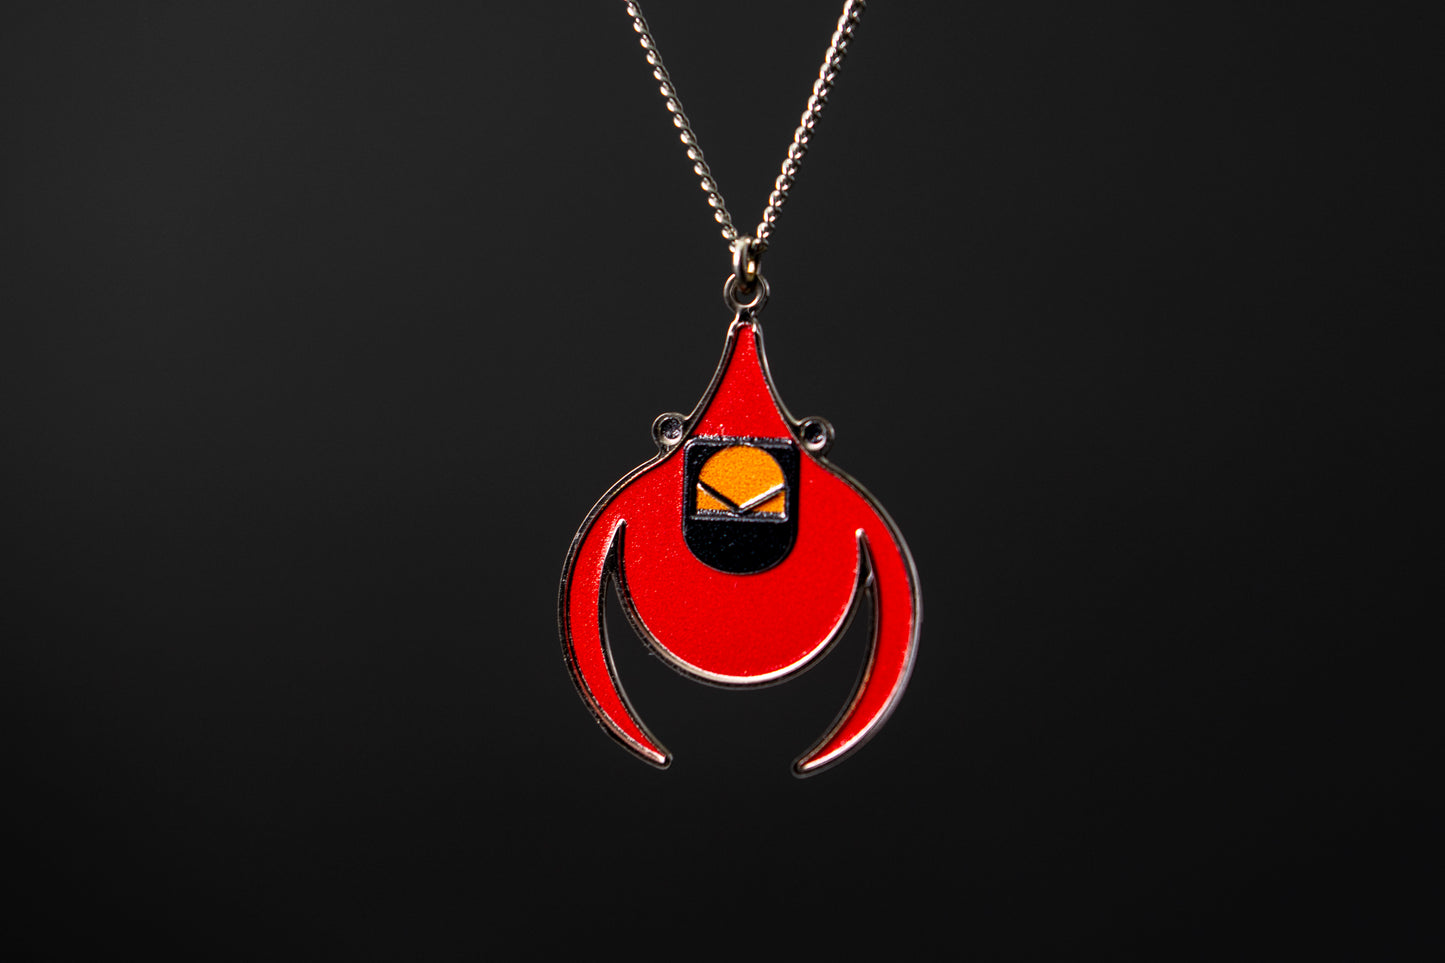 Cardinal Necklace by Charley Harper from David Howell & Co.